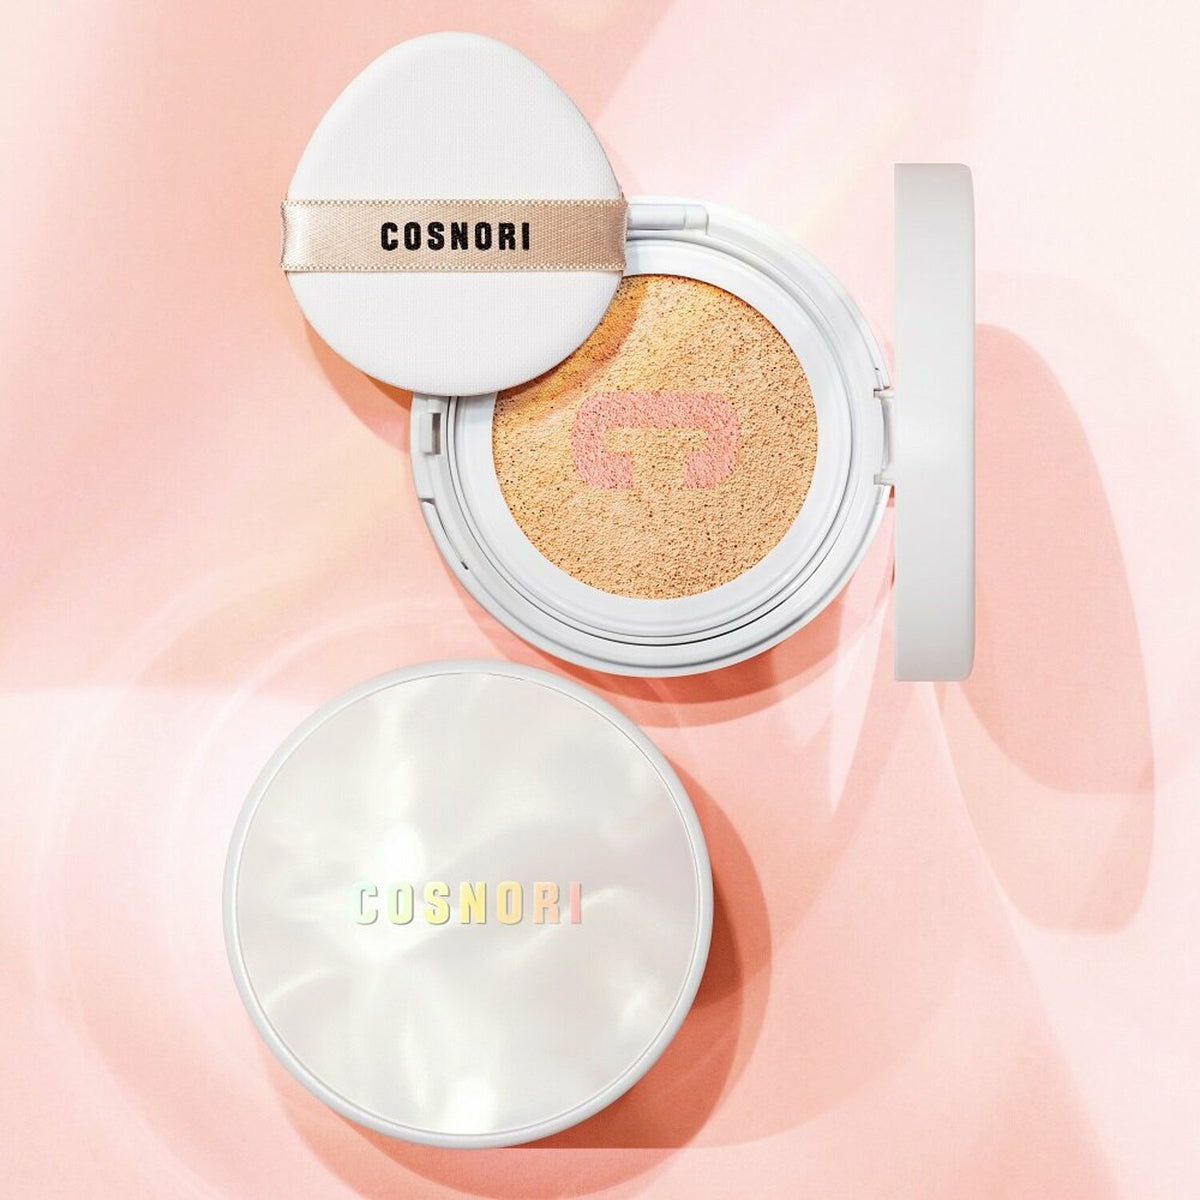 COSNORI Blossom Tone-Up Cushion Clear 14g*2ea (Special Set with Refill